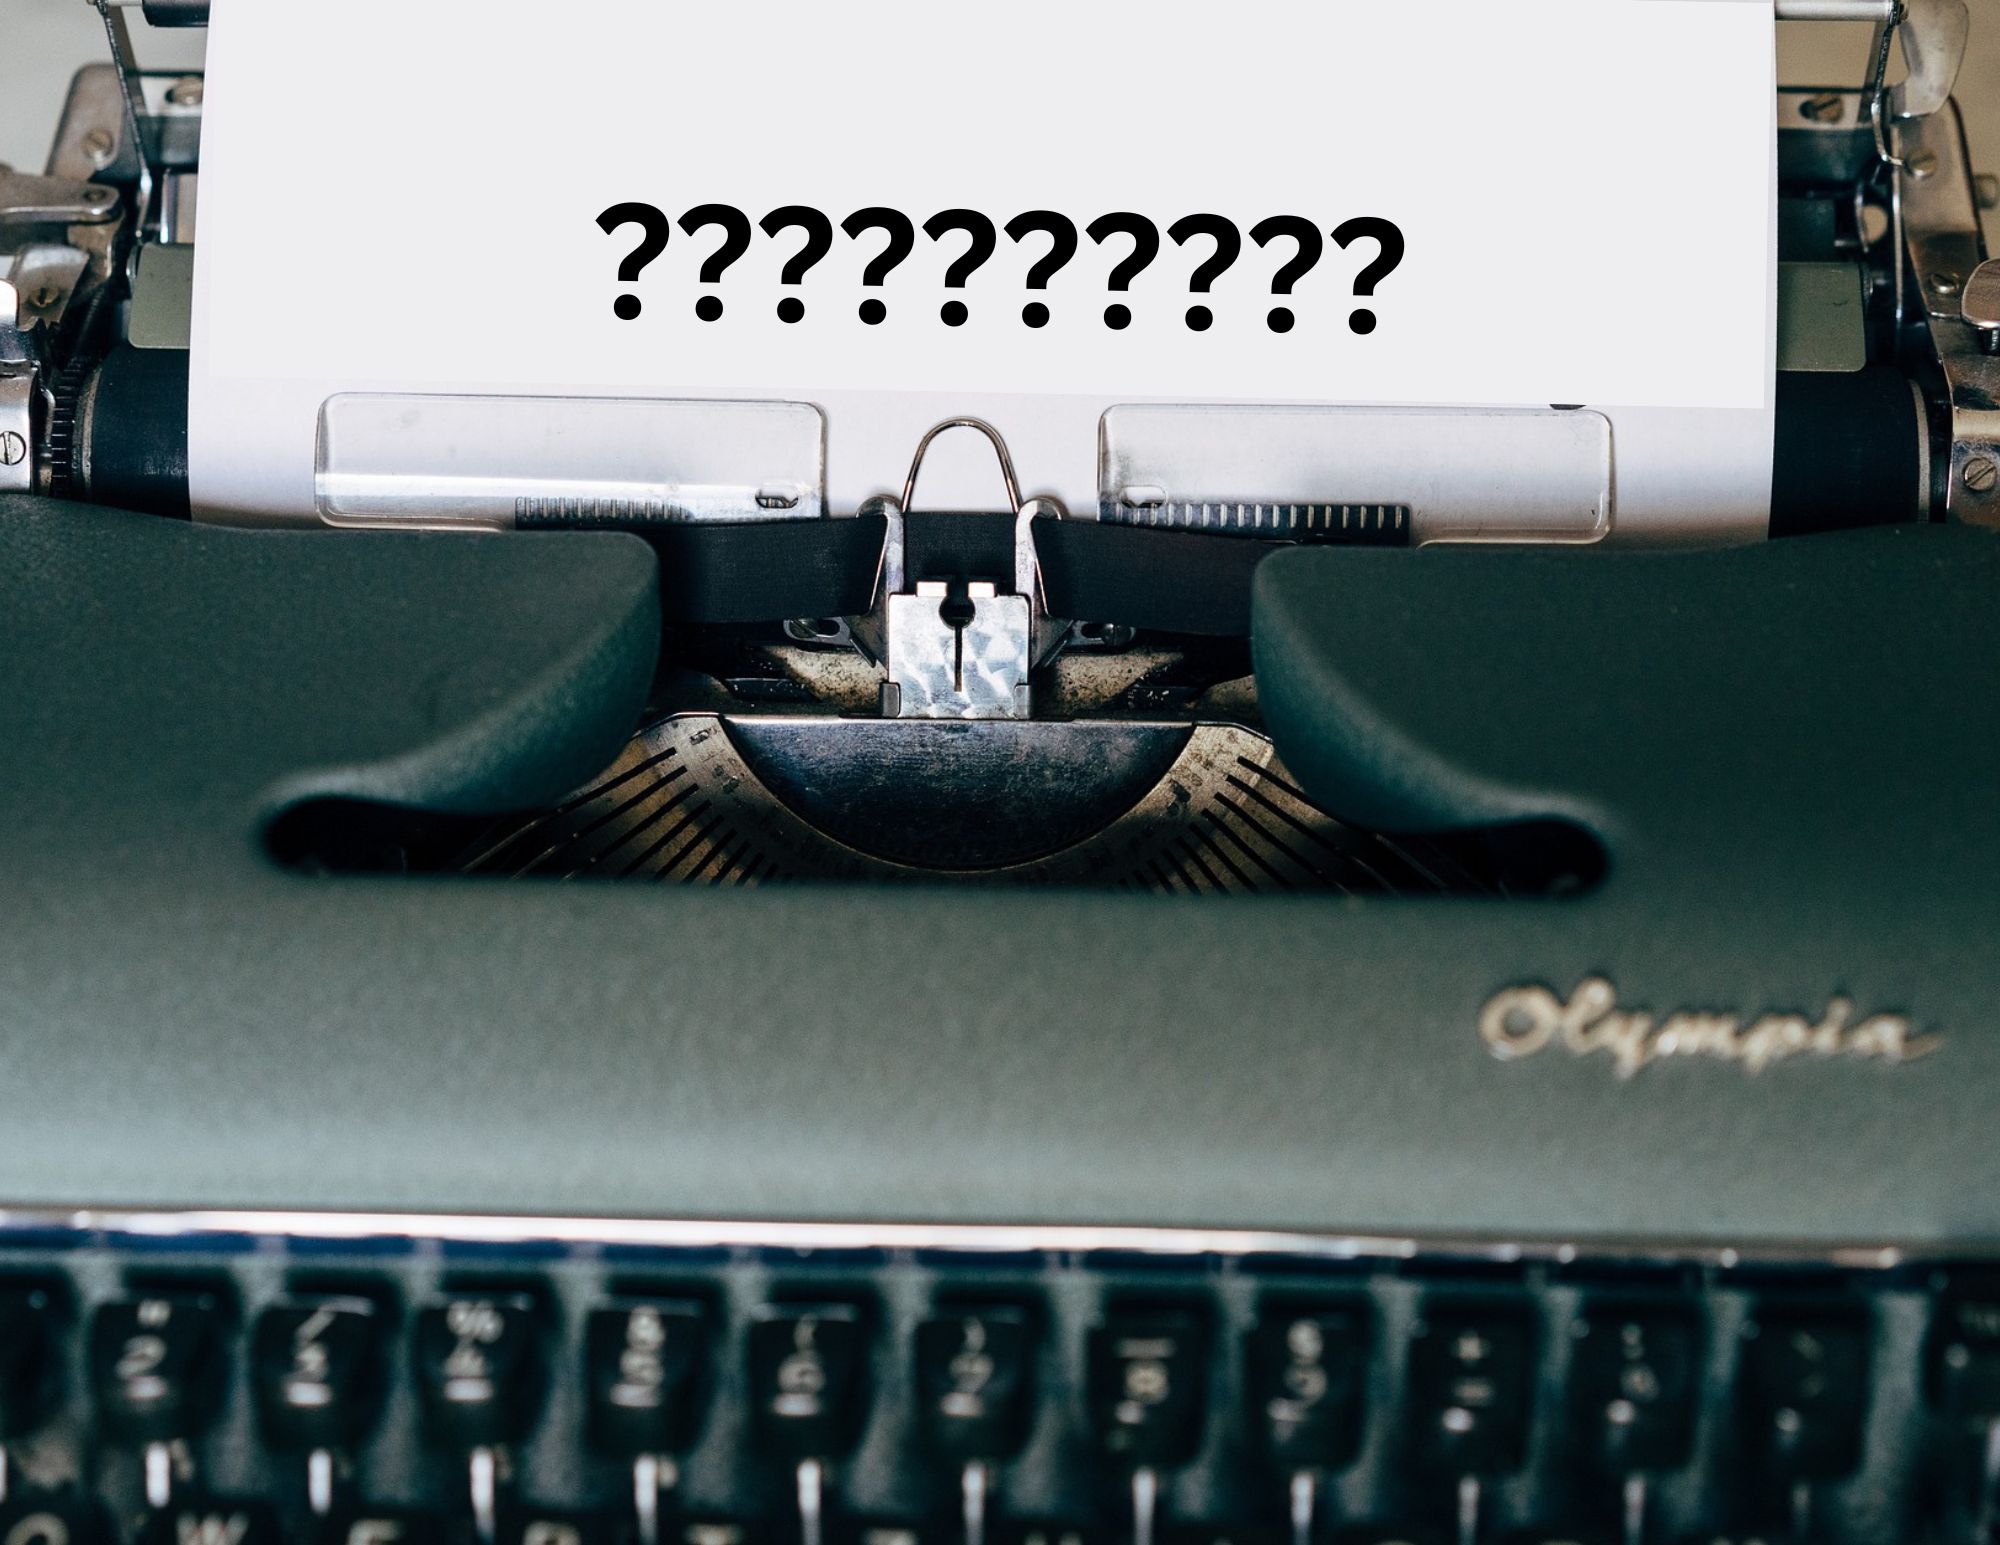 Typewriter with question marks